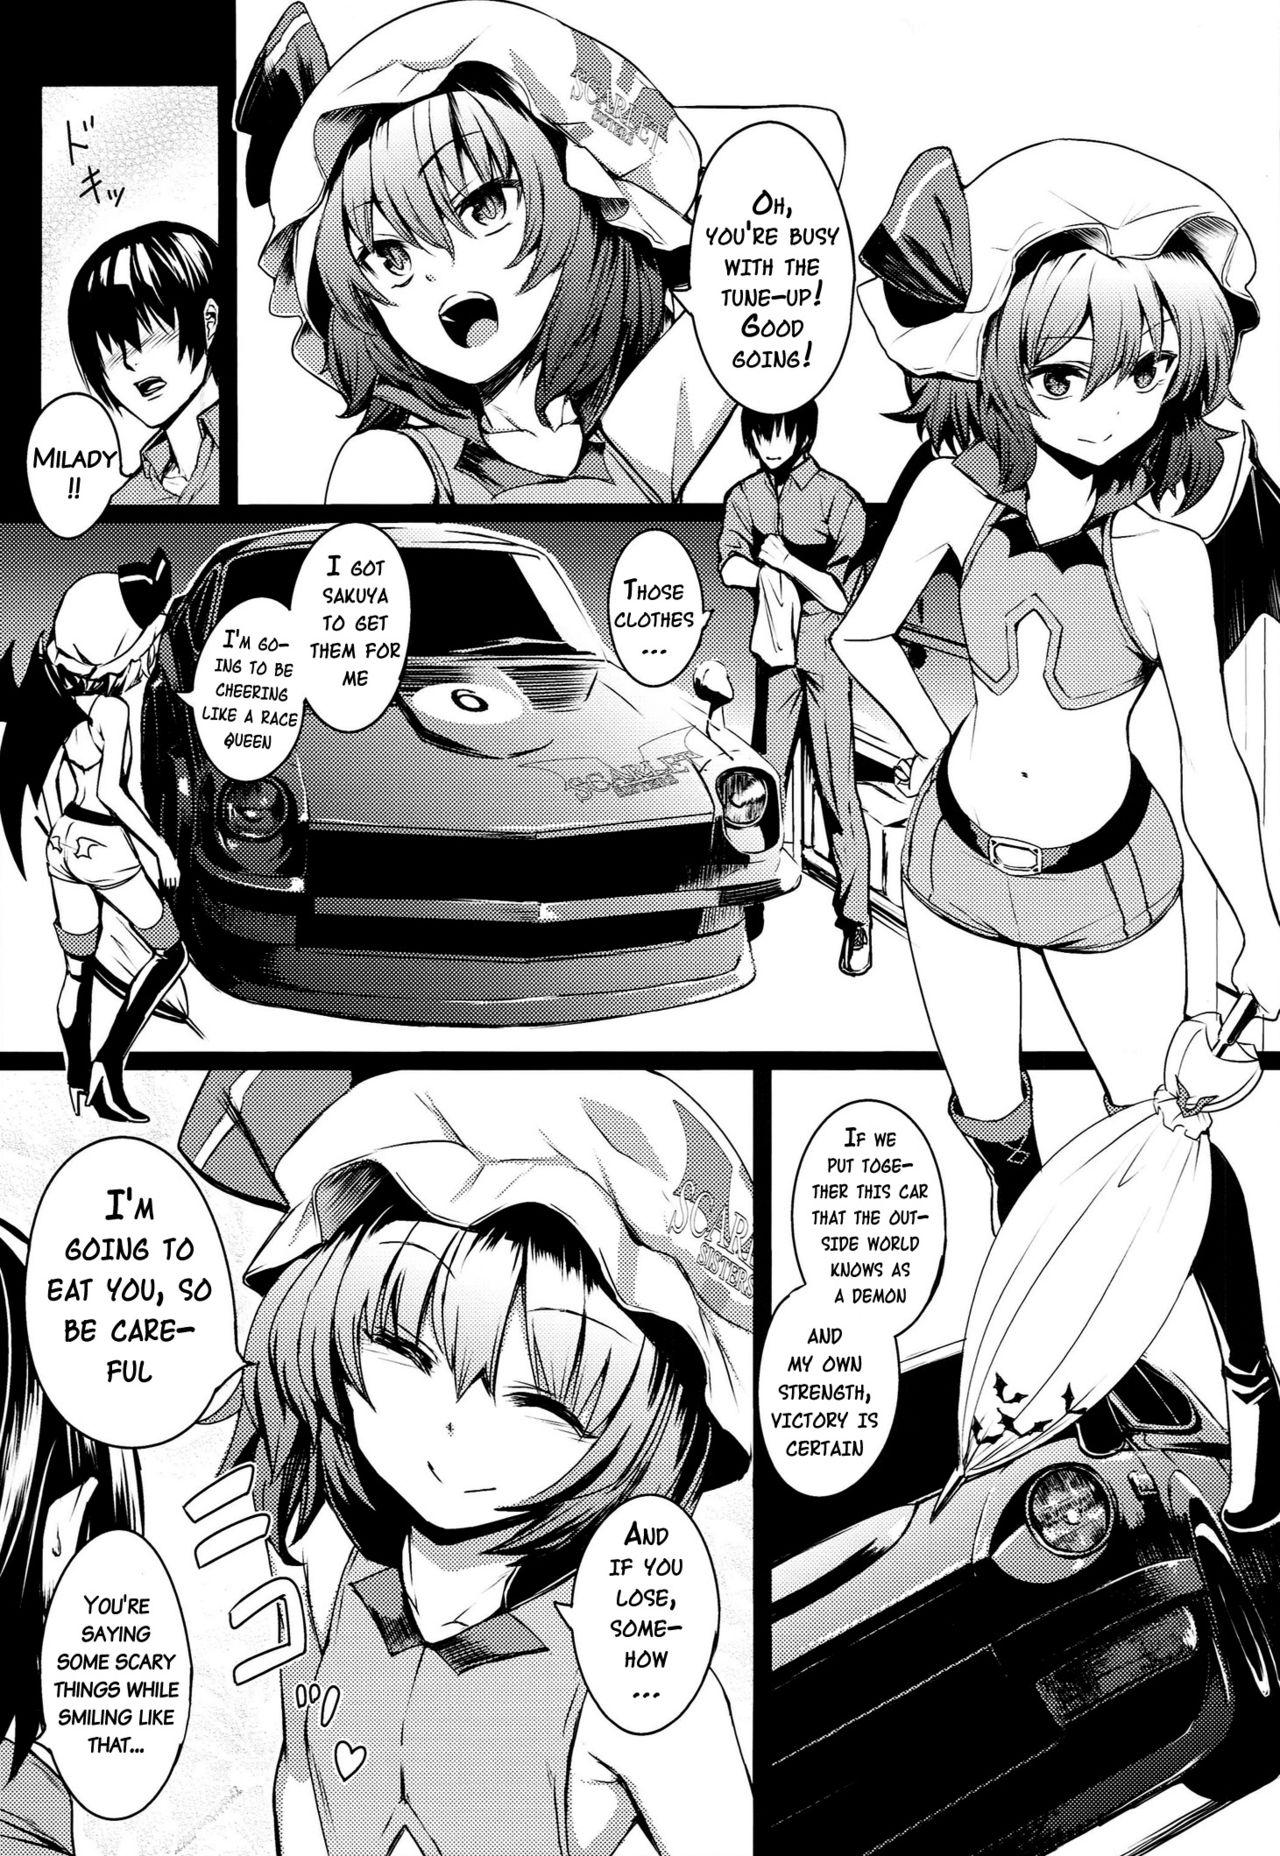 Amature Sex TOUHOU RACE QUEENS COLLABO CLUB - Touhou project Teen Hardcore - Page 4